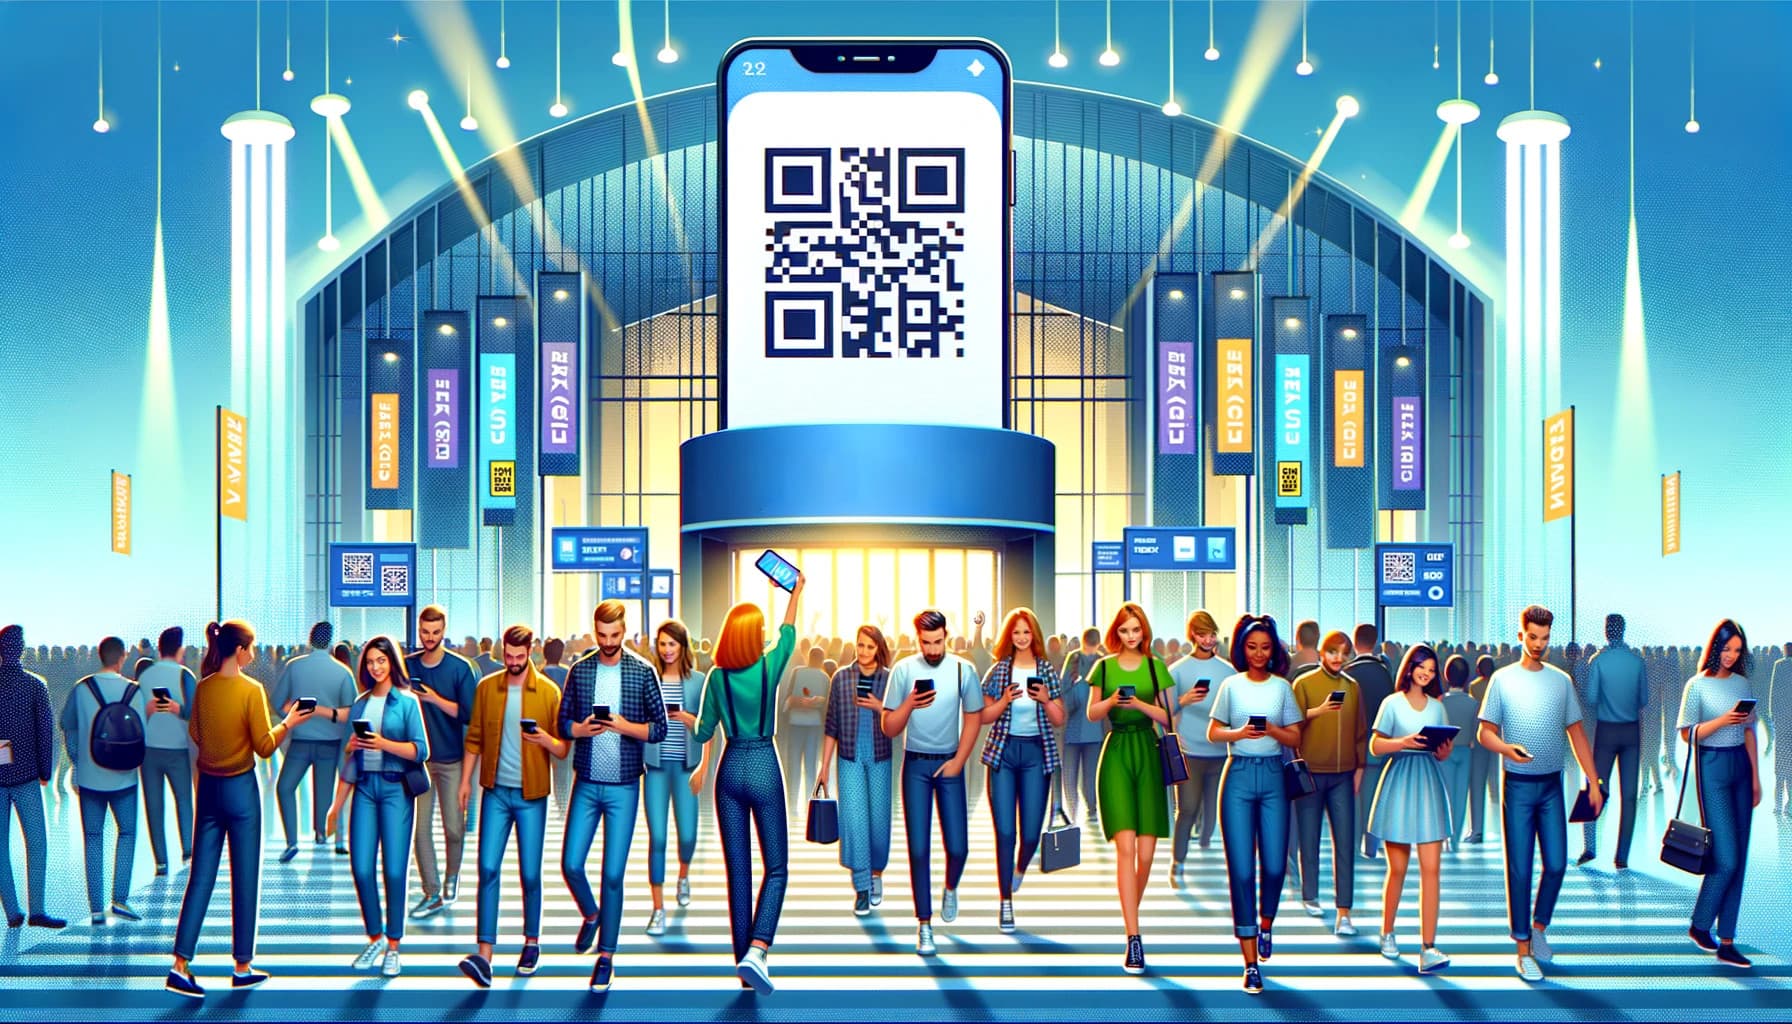 Crowd of event attendees using smartphones to scan a large QR code for entry at a futuristic venue entrance with vibrant lighting and digital banners.